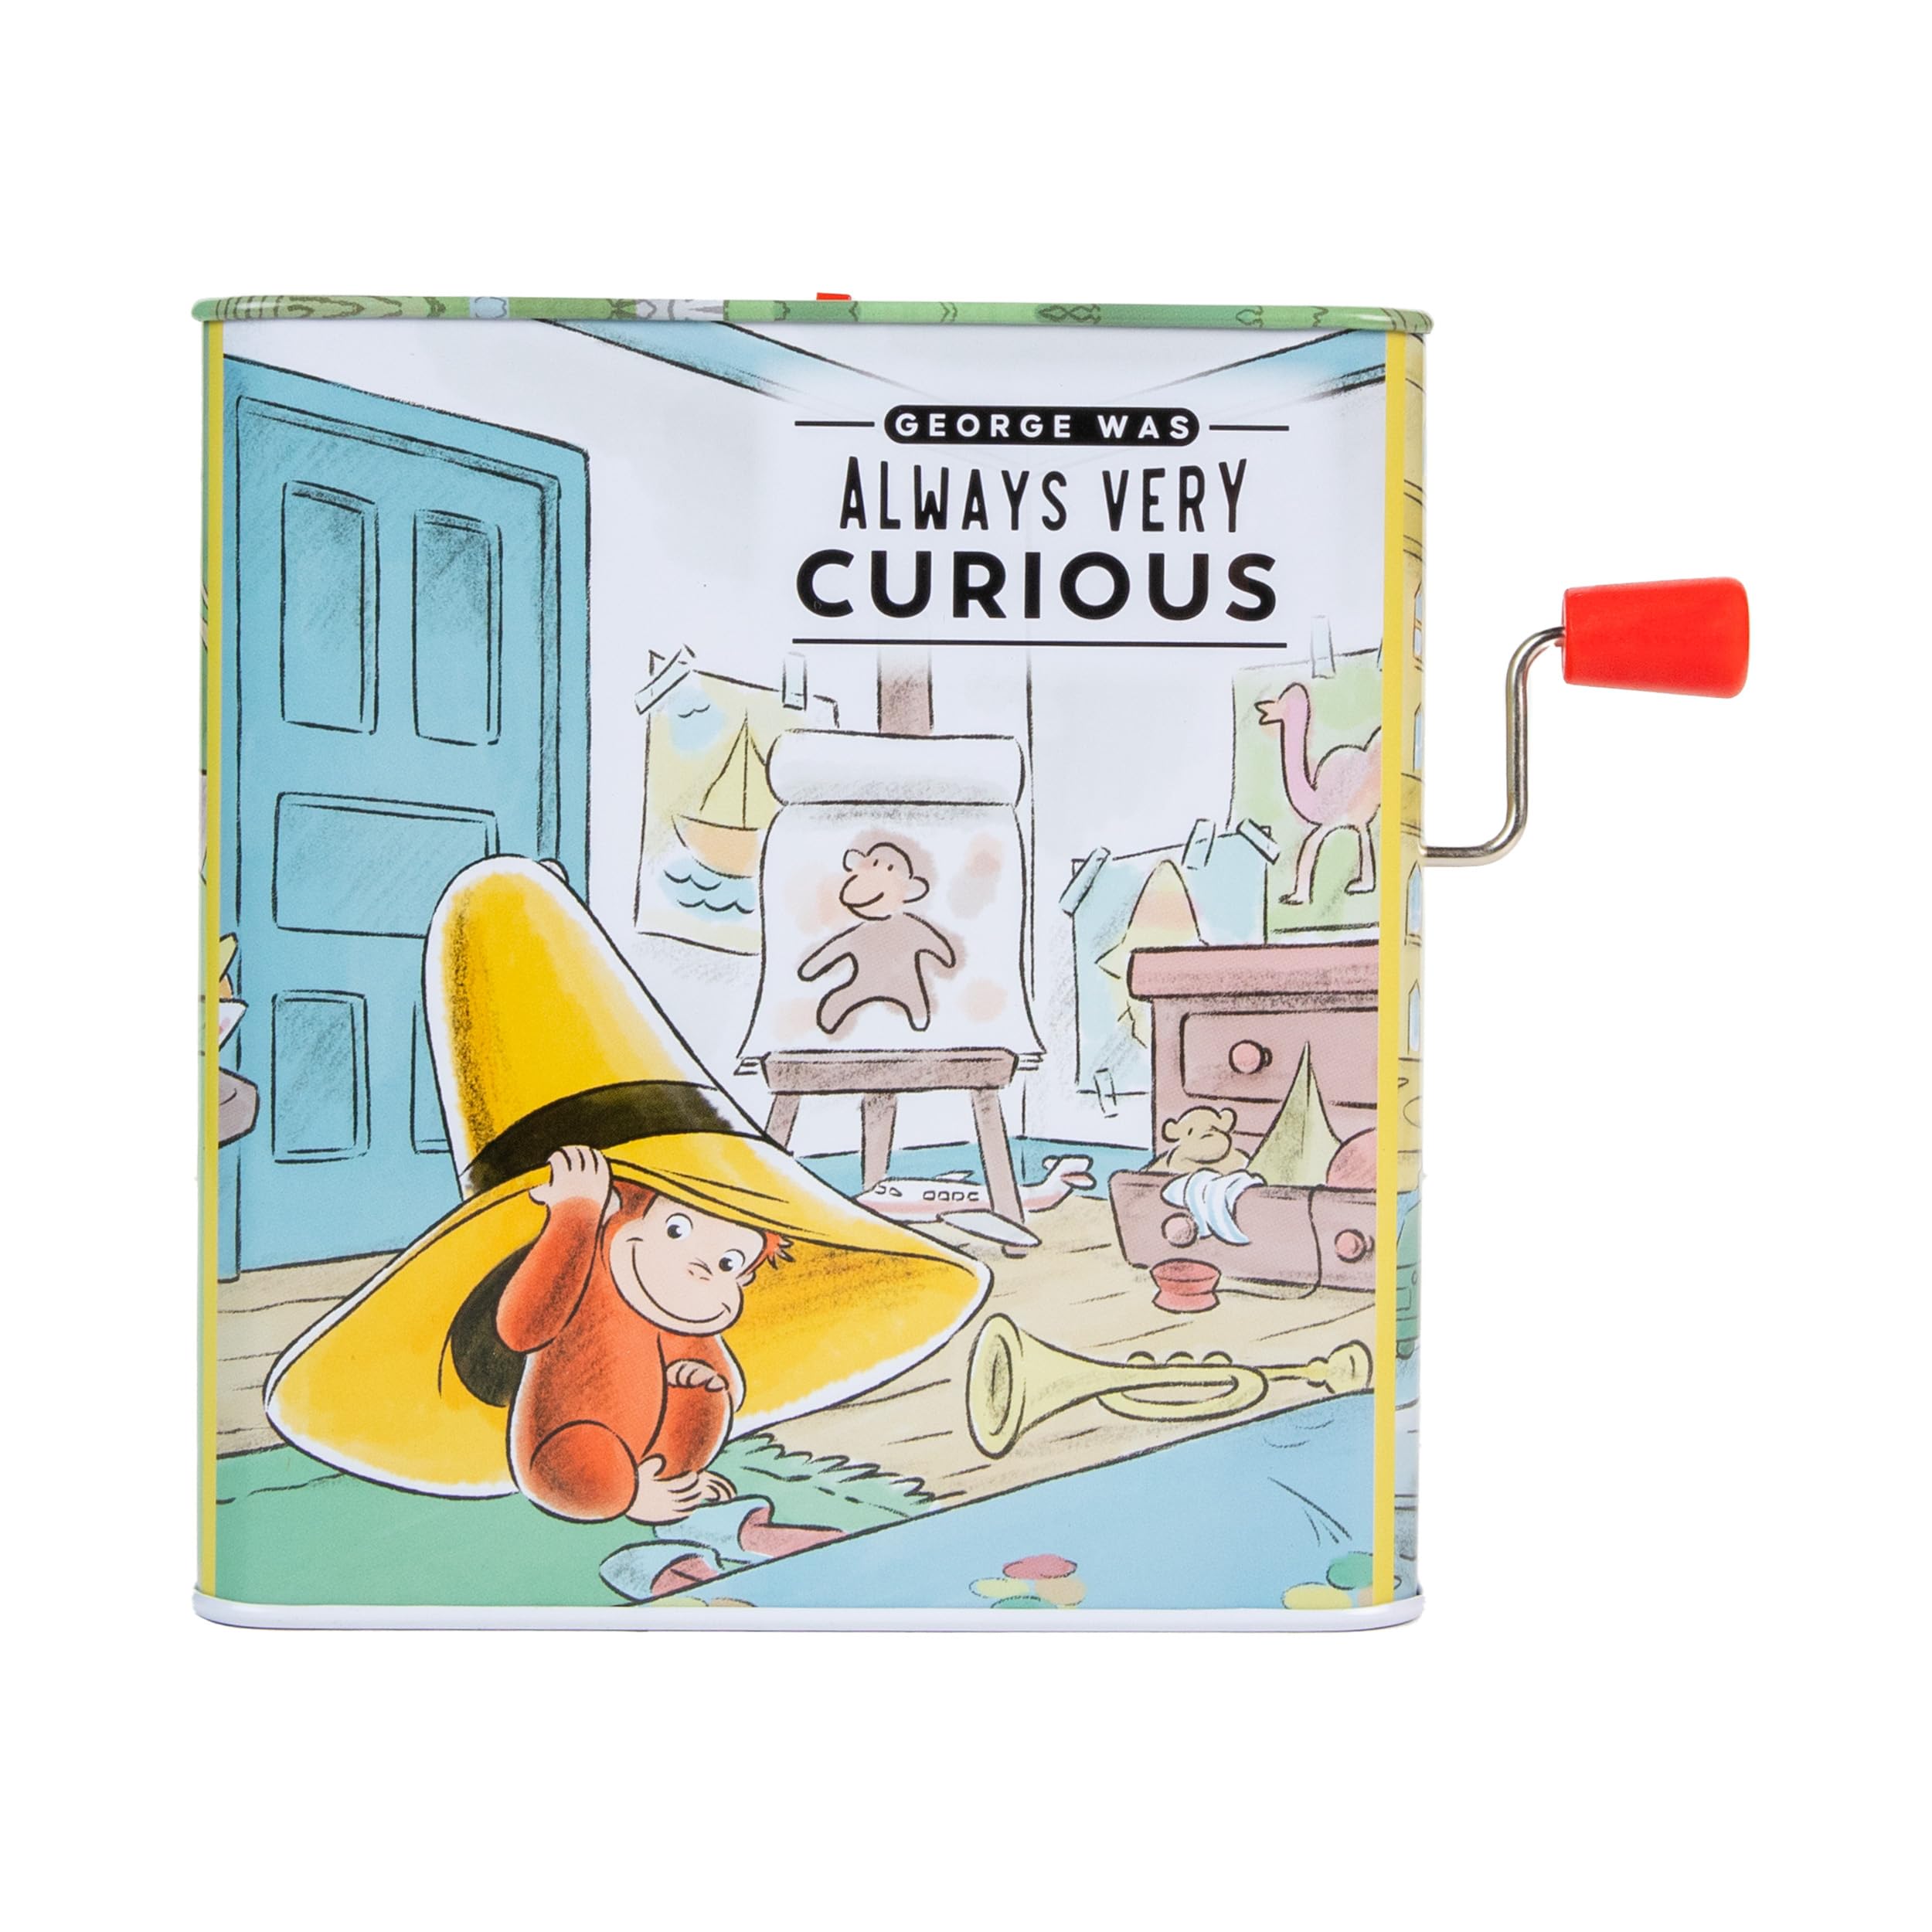 KIDS PREFERRED Curious George Jack-in-The-Box - Musical Toy for Babies